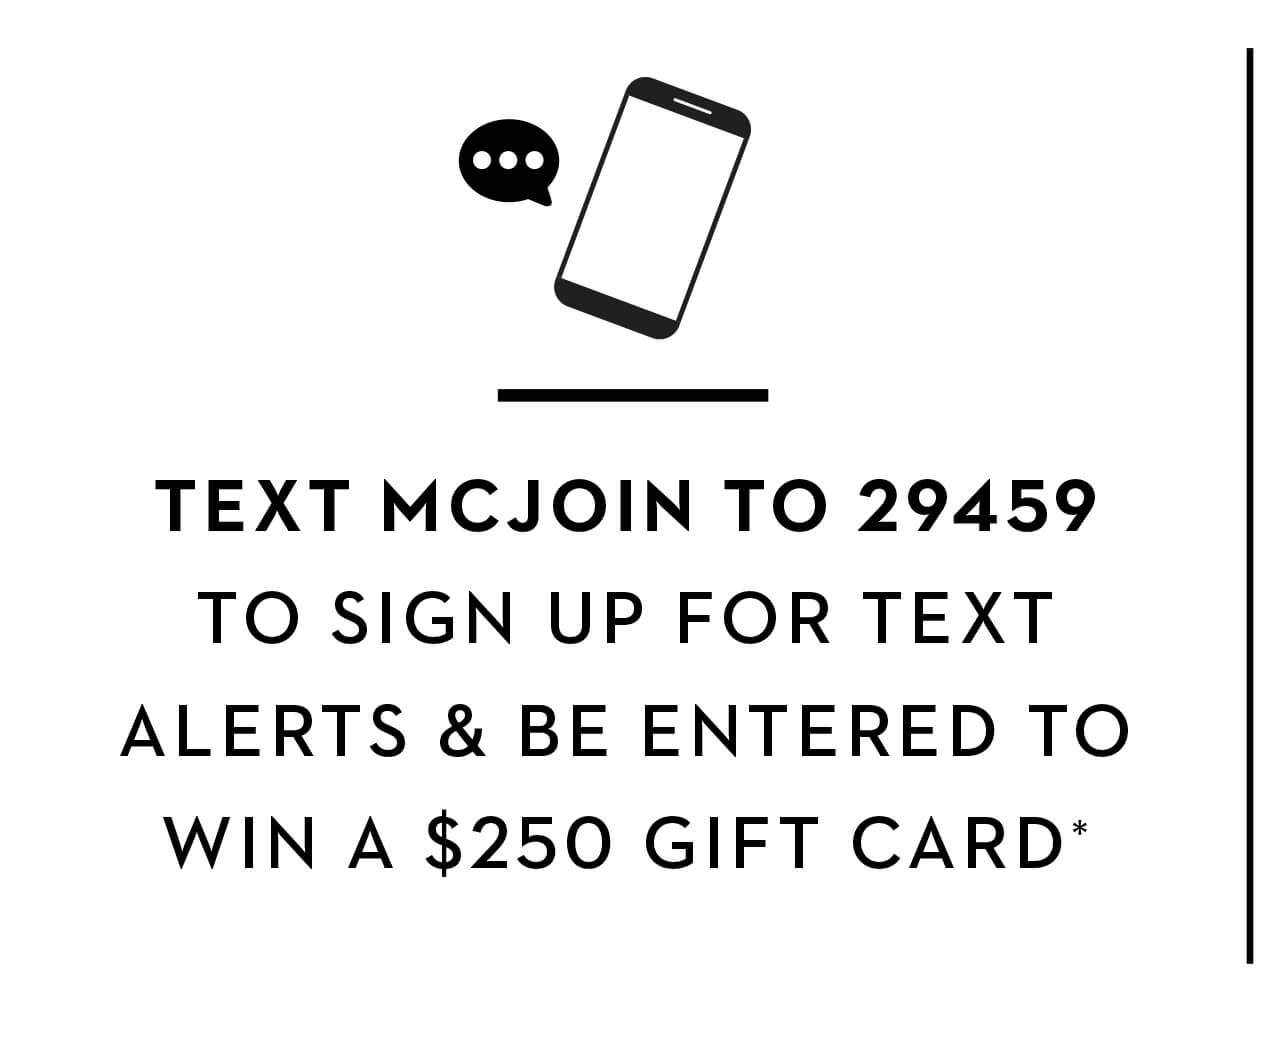 TEXT MCJOIN TO 29459 TO SIGN UP FOR TEXT ALERTS & BE ENTERED TO WIN A $250 GIFT CARD*